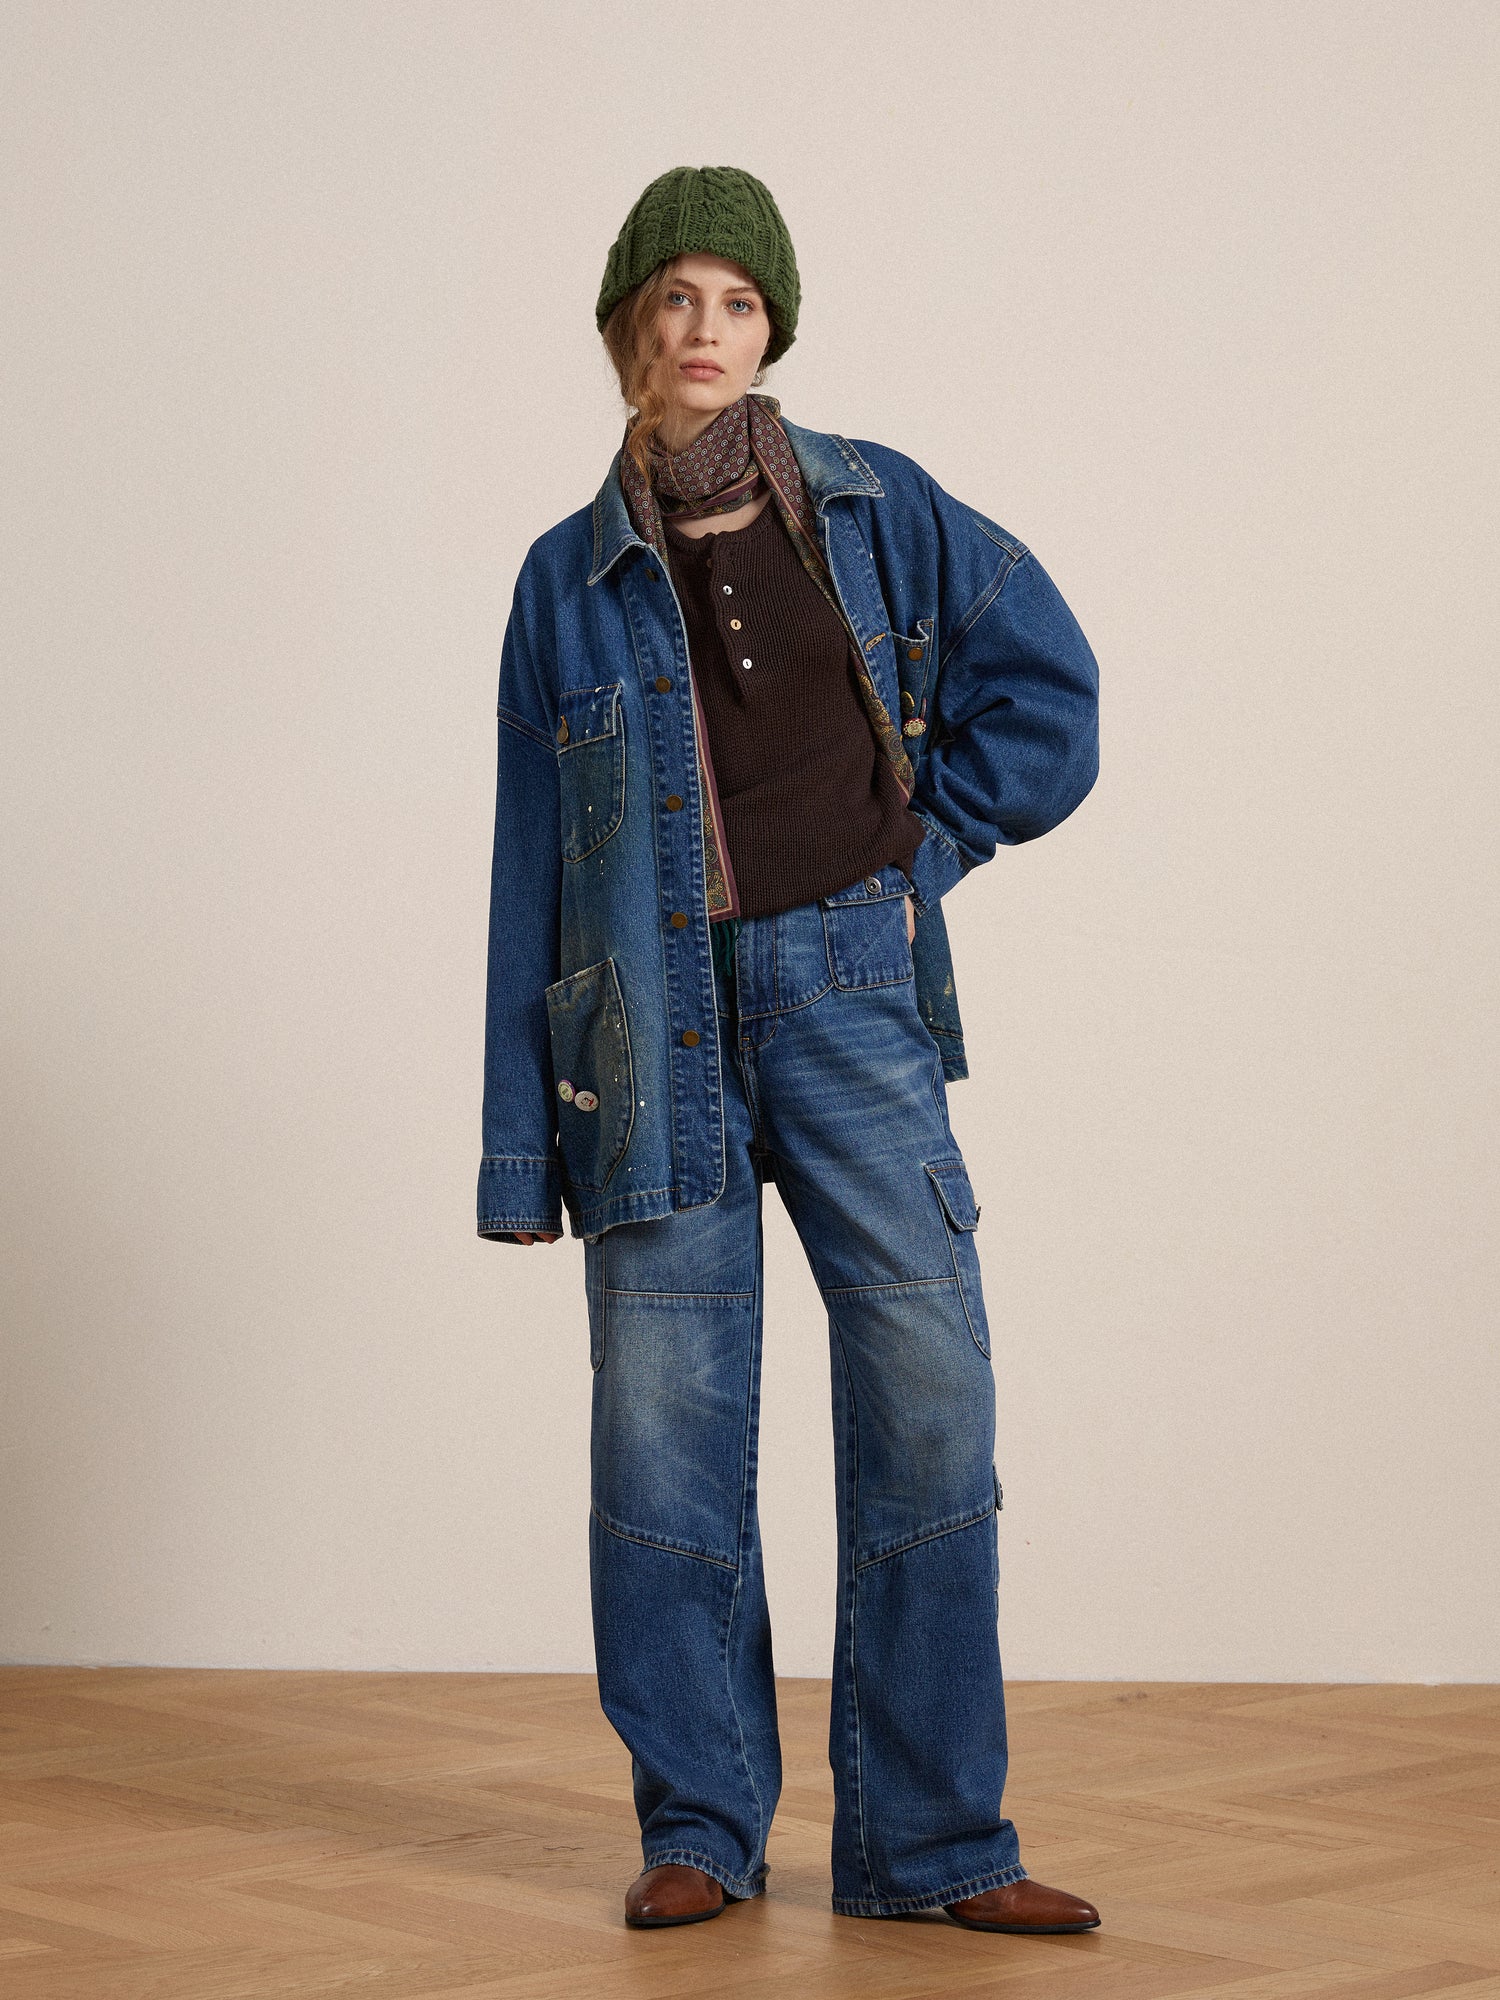 A woman in blue jeans and a Kavir Denim Painter Jacket by Found is standing on a wooden floor.